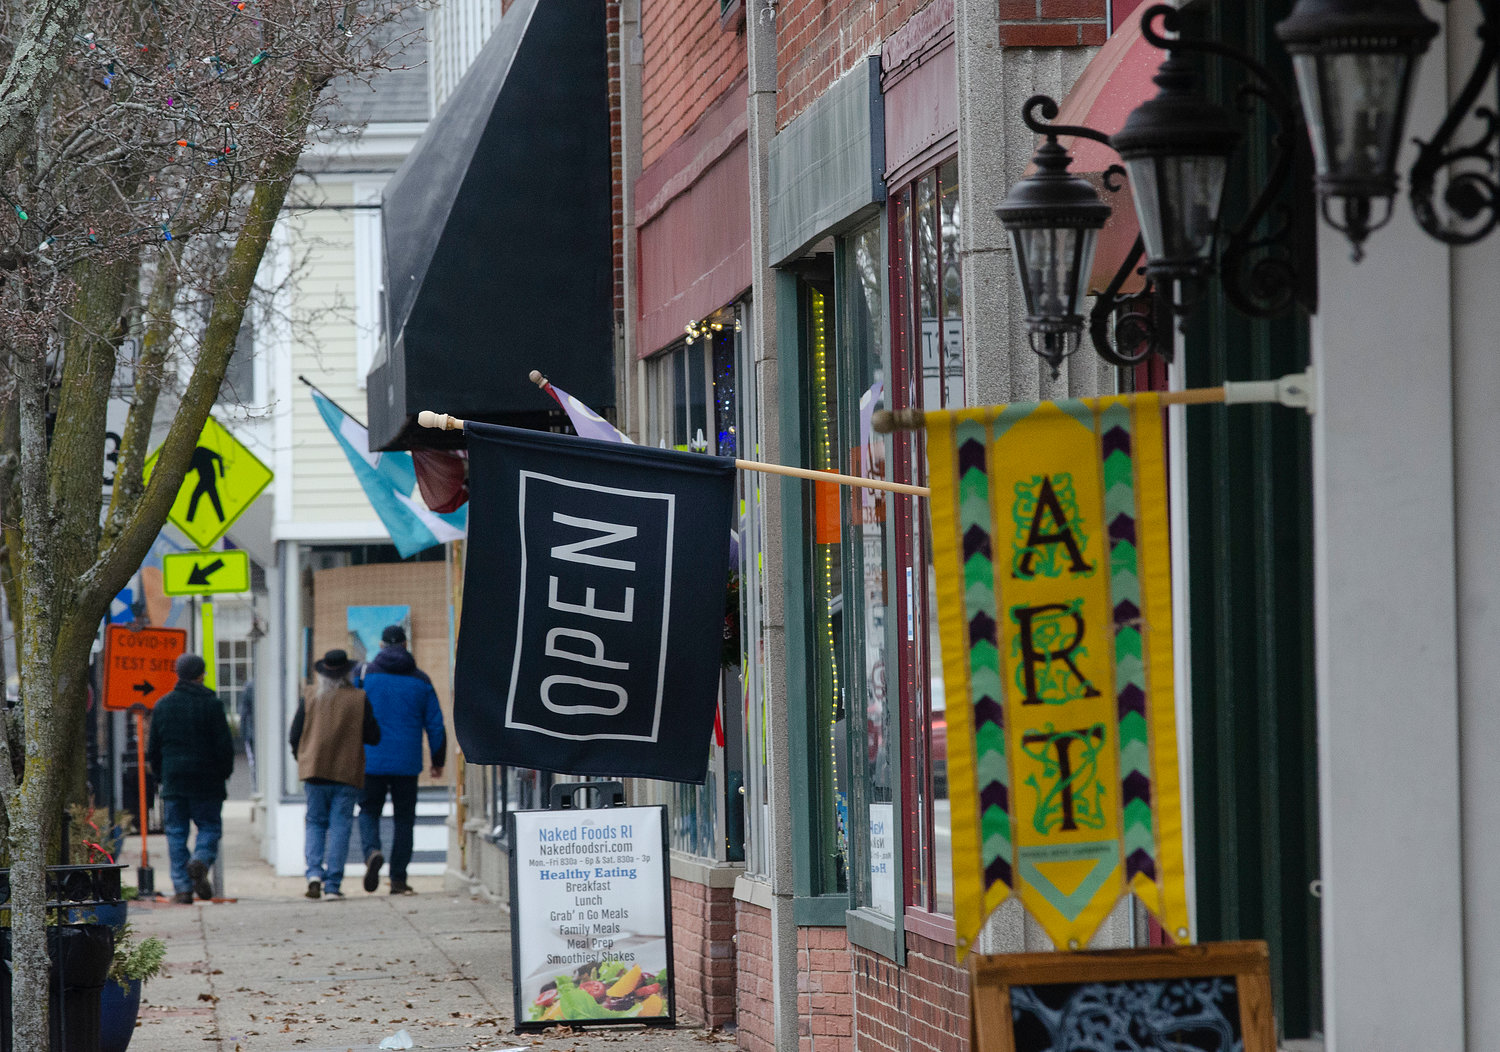 Planning to use $250,000 in American Rescue Plan funding, the Warren Town Council officially approved a facade improvement plan aimed at fixing up and rejuvenating downtown storefronts.